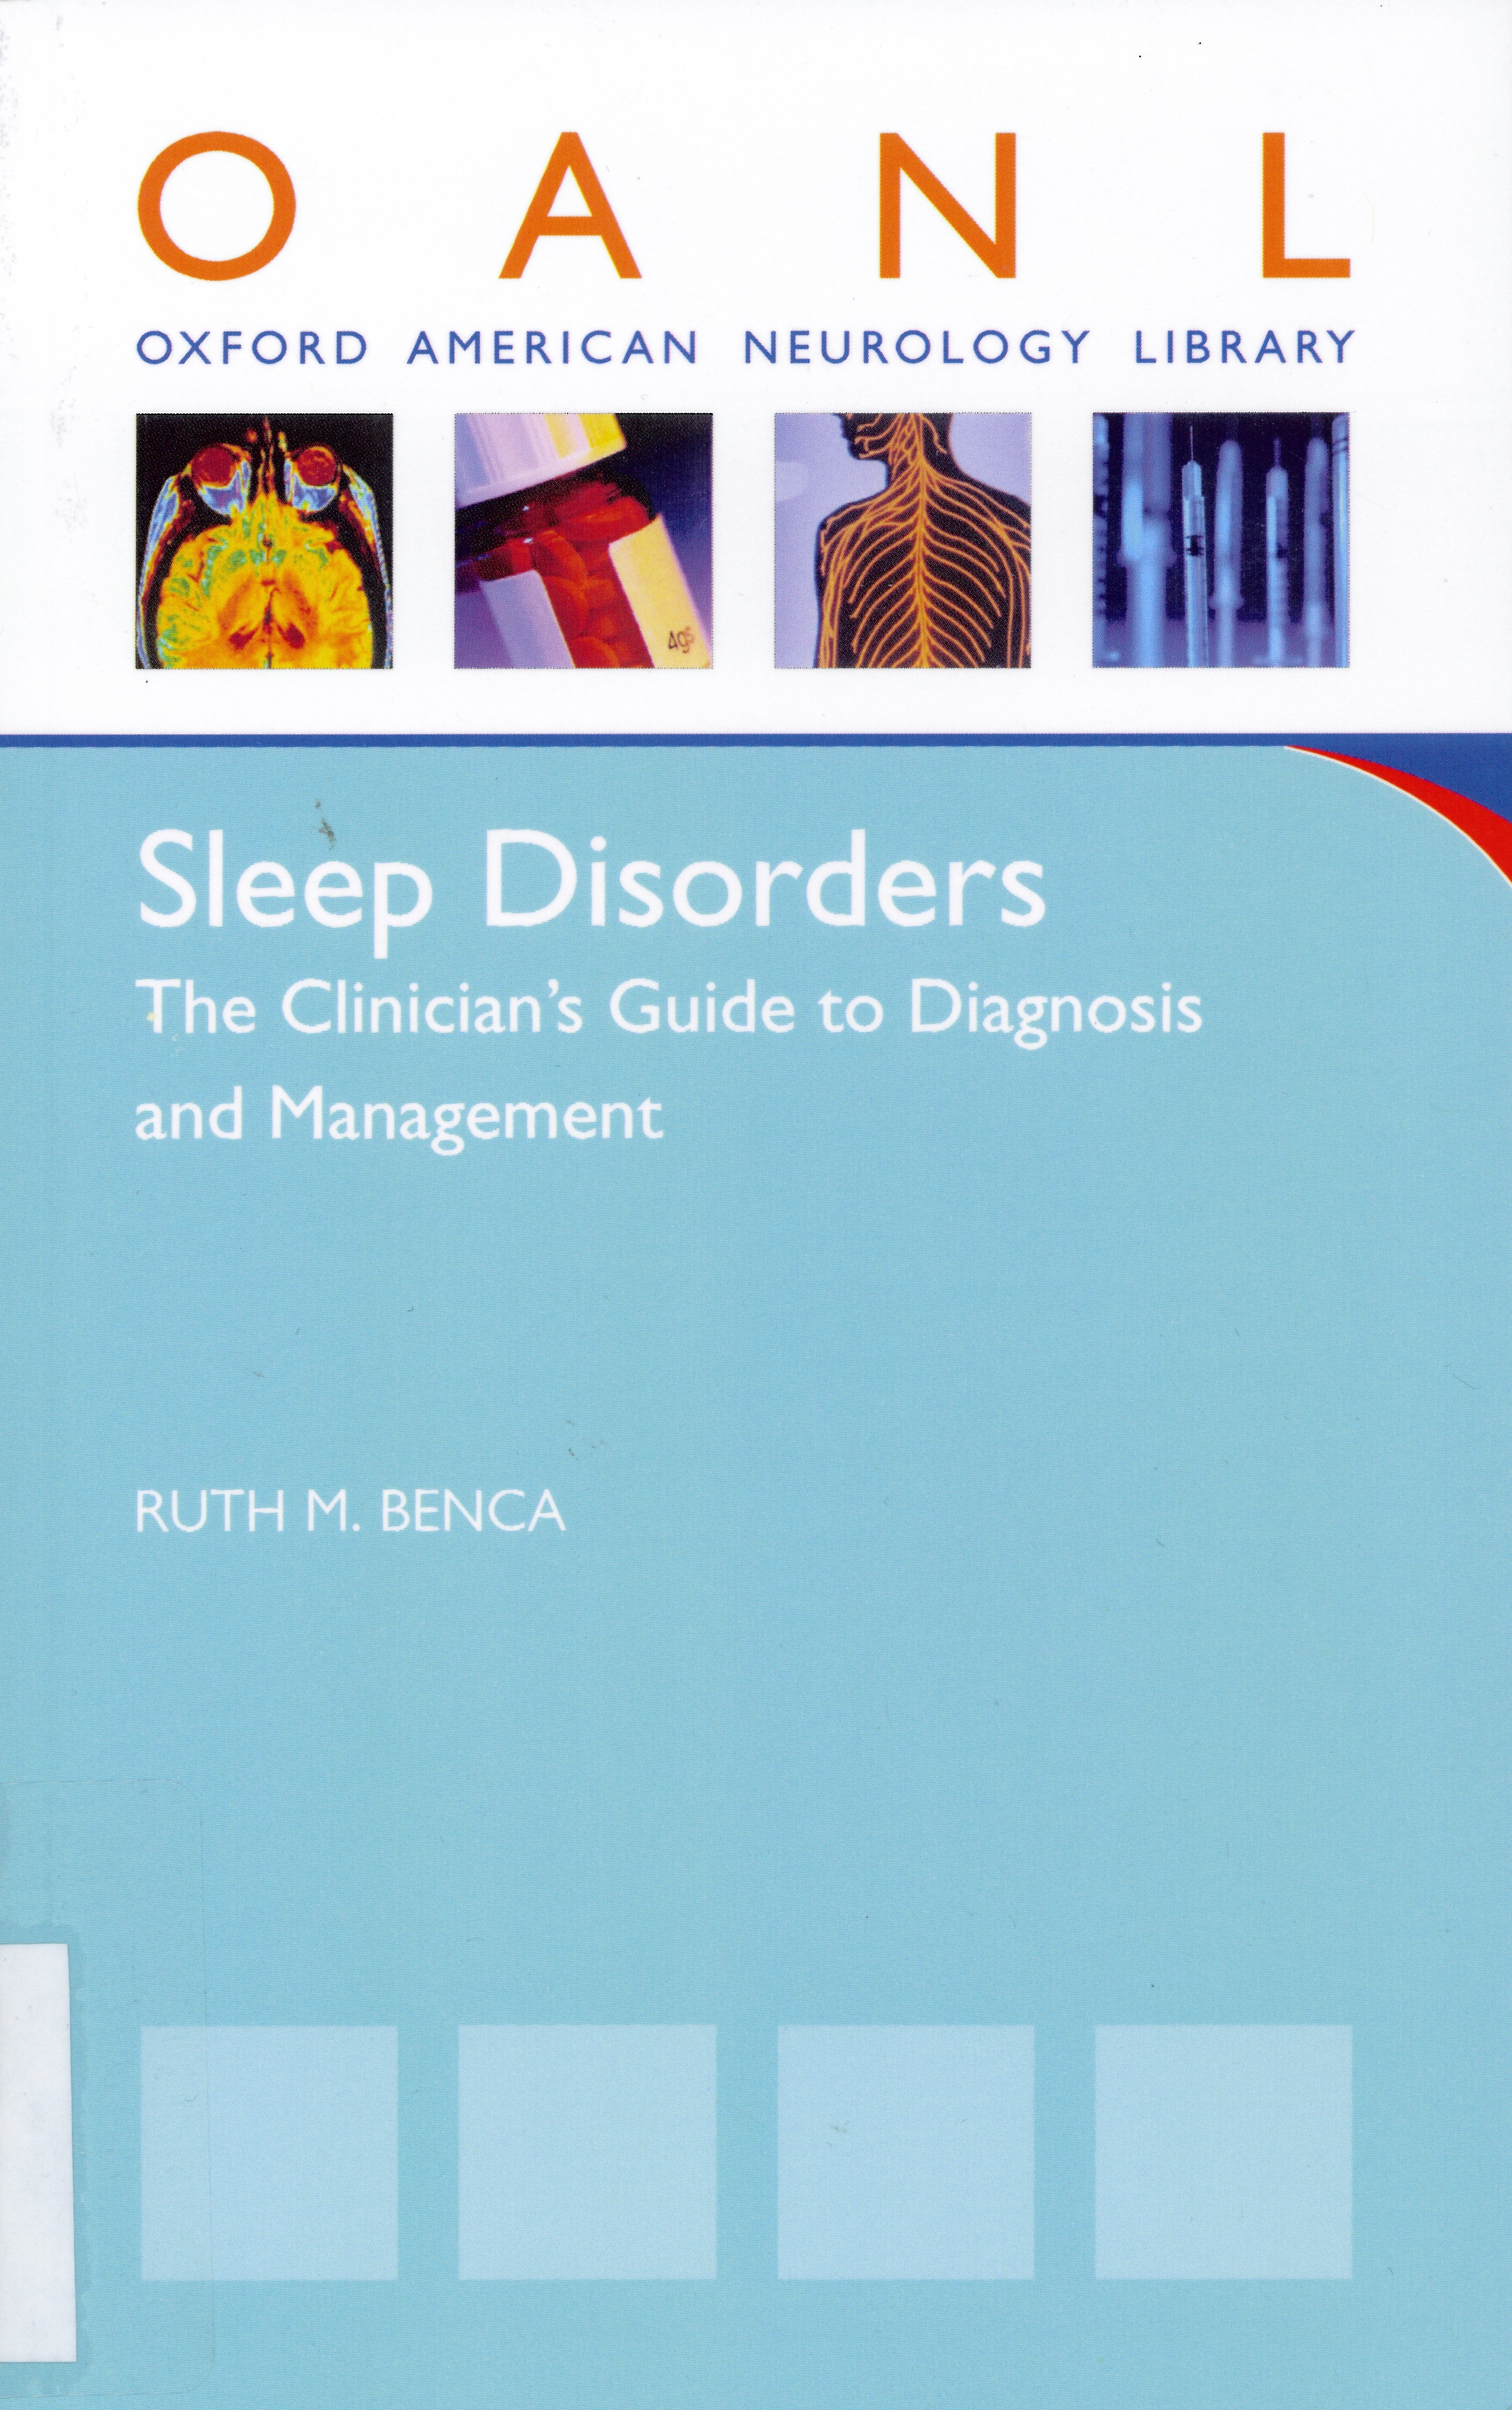 Sleep disorders : the clinician's guide to diagnosis and management